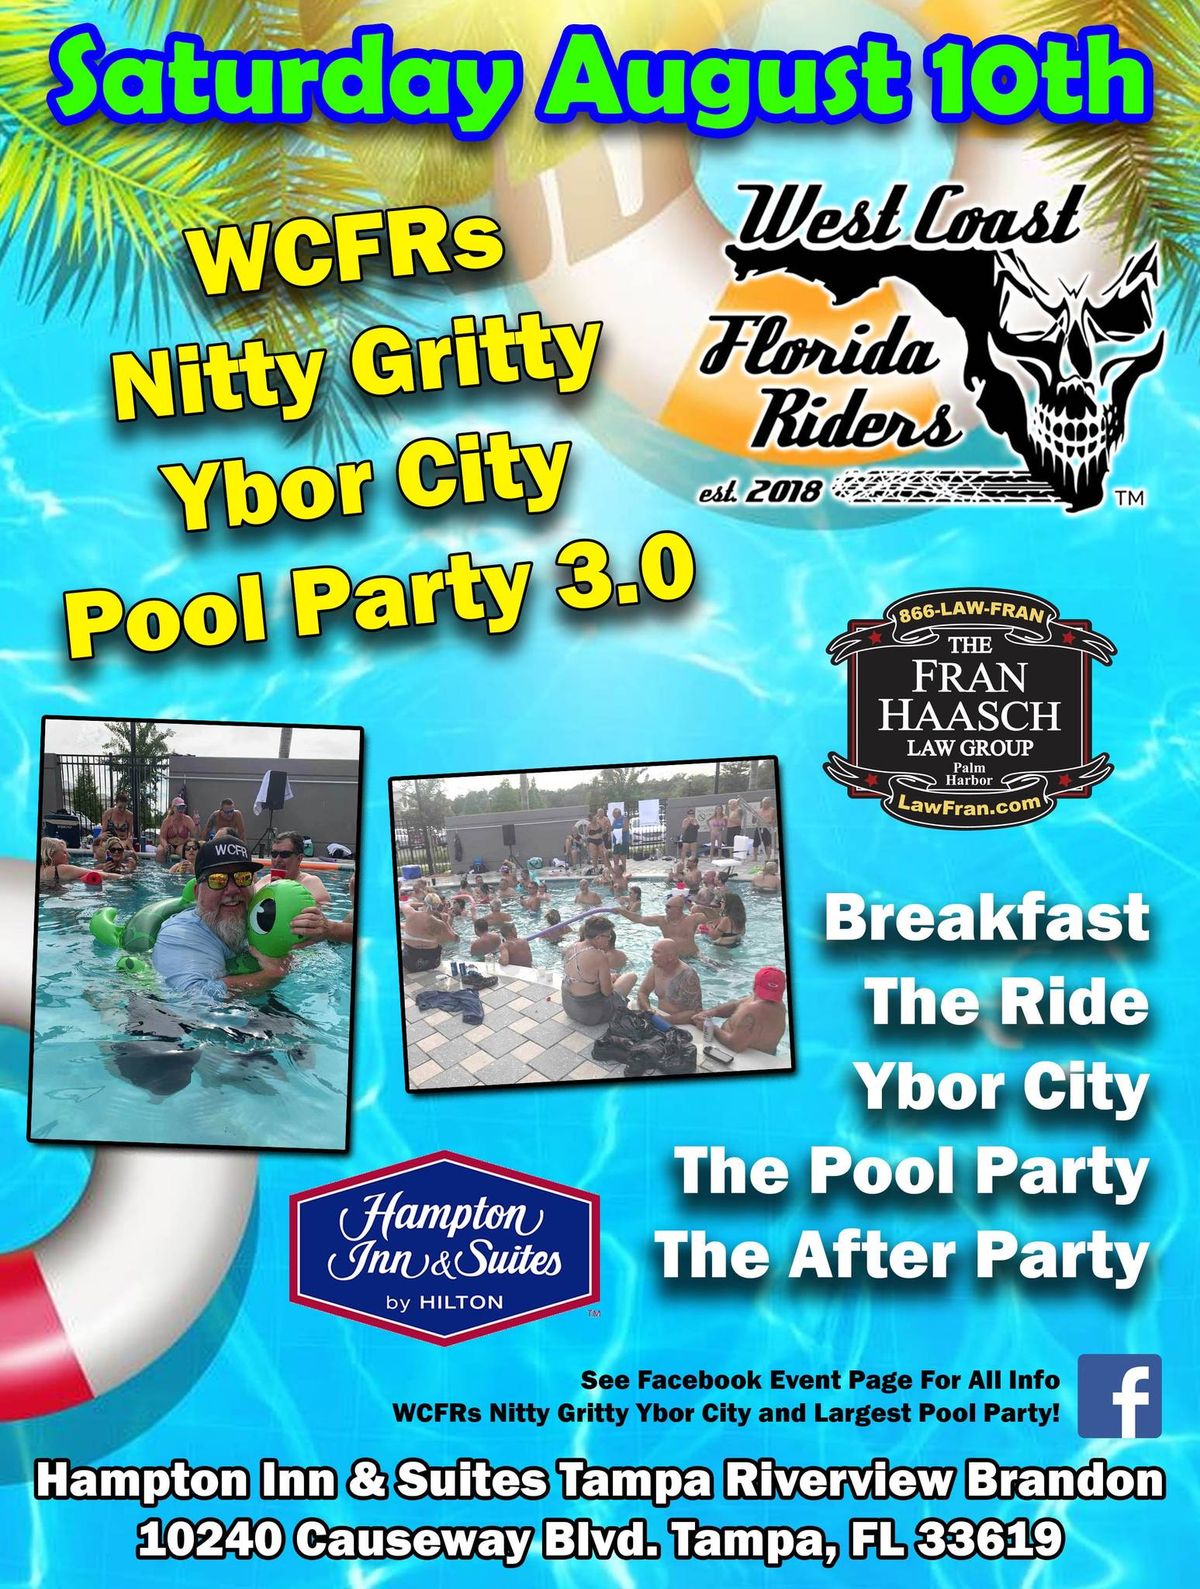 Nitty Gritty Ybor City and WCFR Pool Party 3.0!